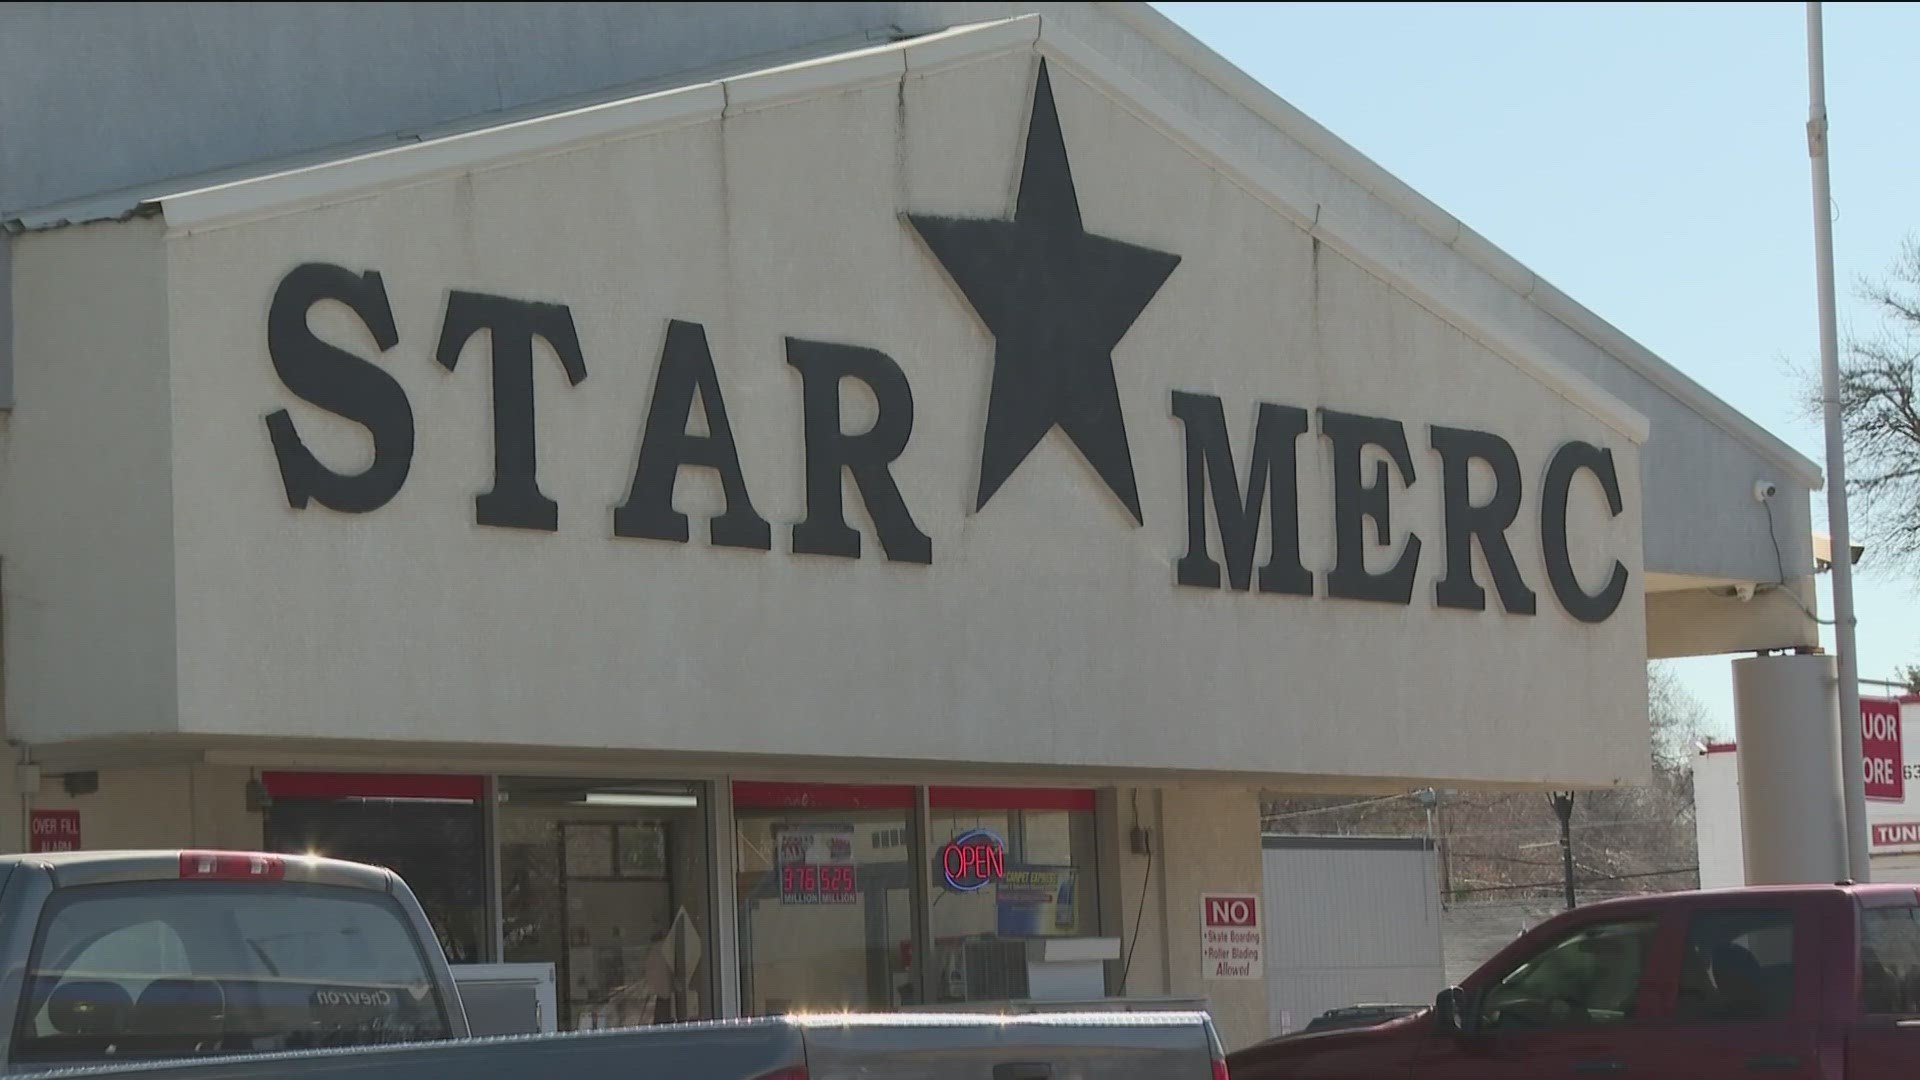 House Bill 570 will grandfather stores previously licensed in the state for decades.